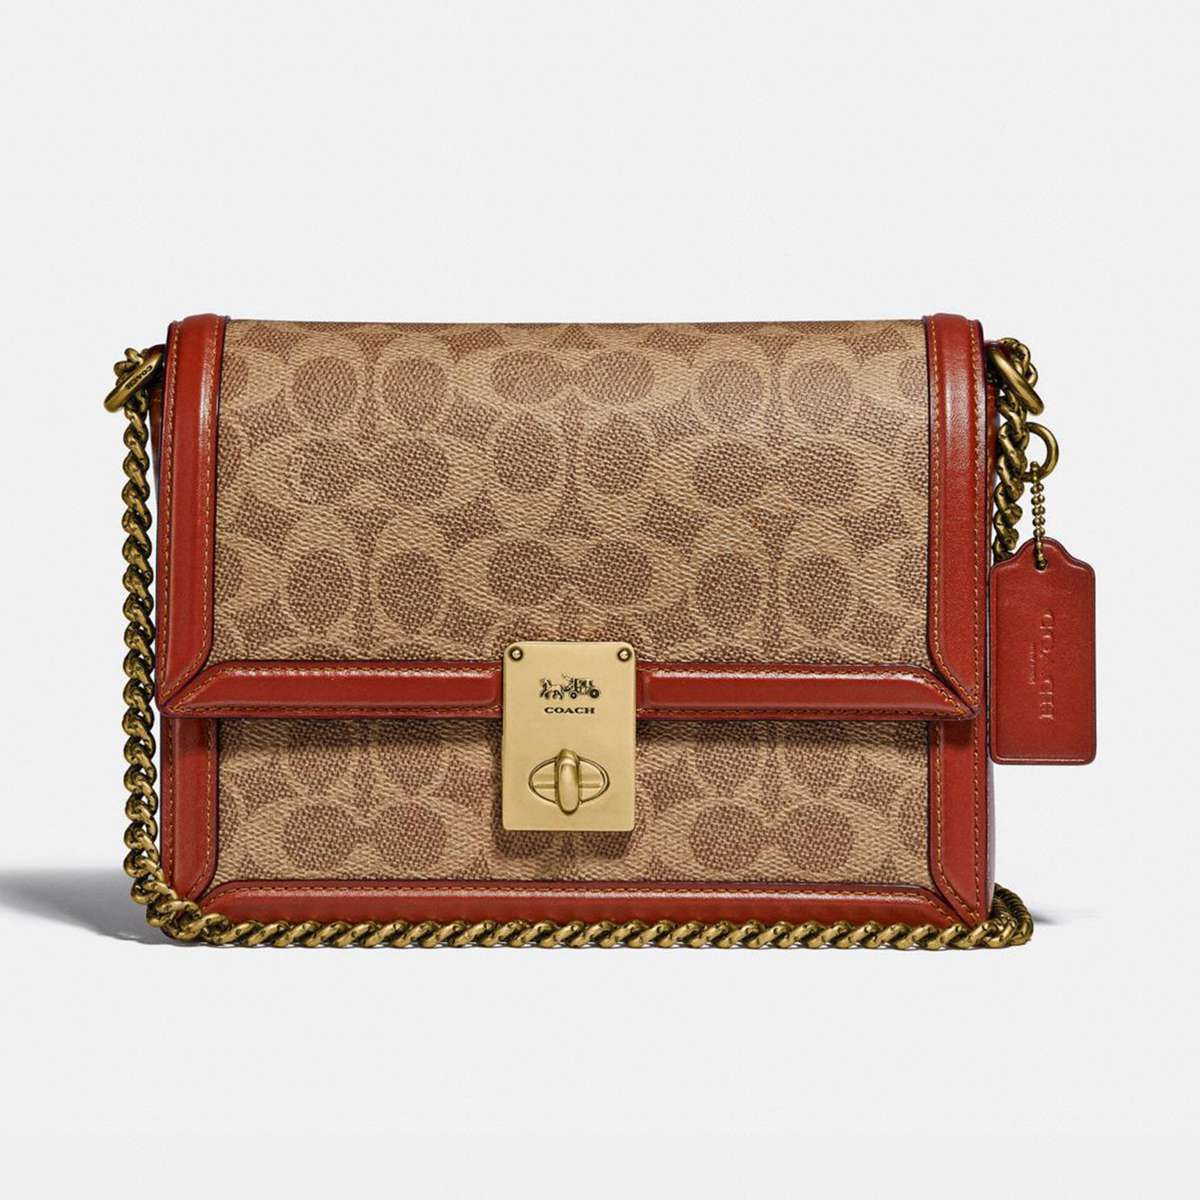 Coach Cyber Monday 2020: Best Bag, Shoe, Clothing Deals | InStyle